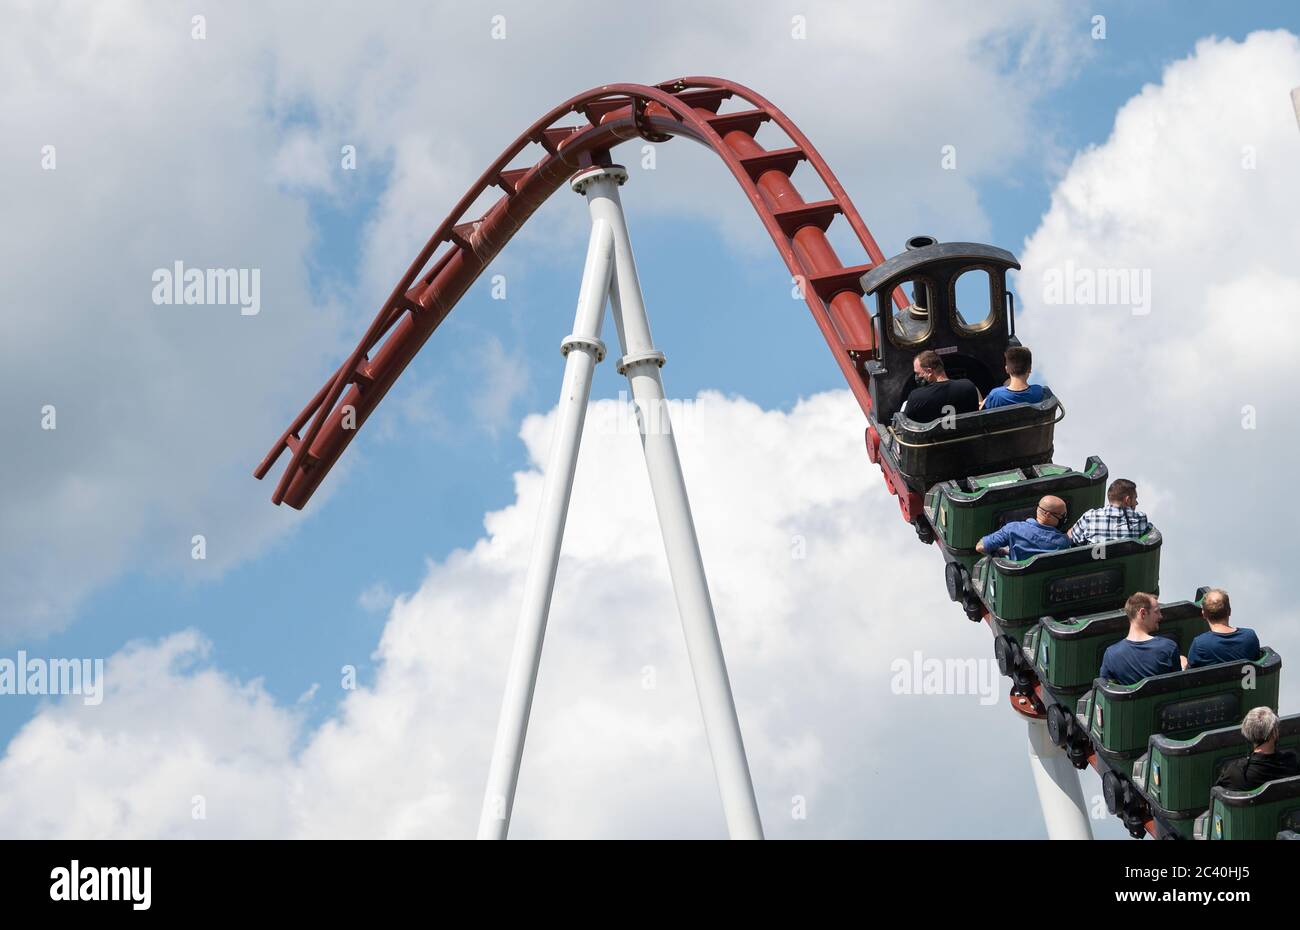 Cleebronn, Germany. 23rd June, 2020. Visitors to the opening event for the  inauguration of two new roller coasters at the Tripsdrill theme park ride  the roller coaster "full steam ahead". For the